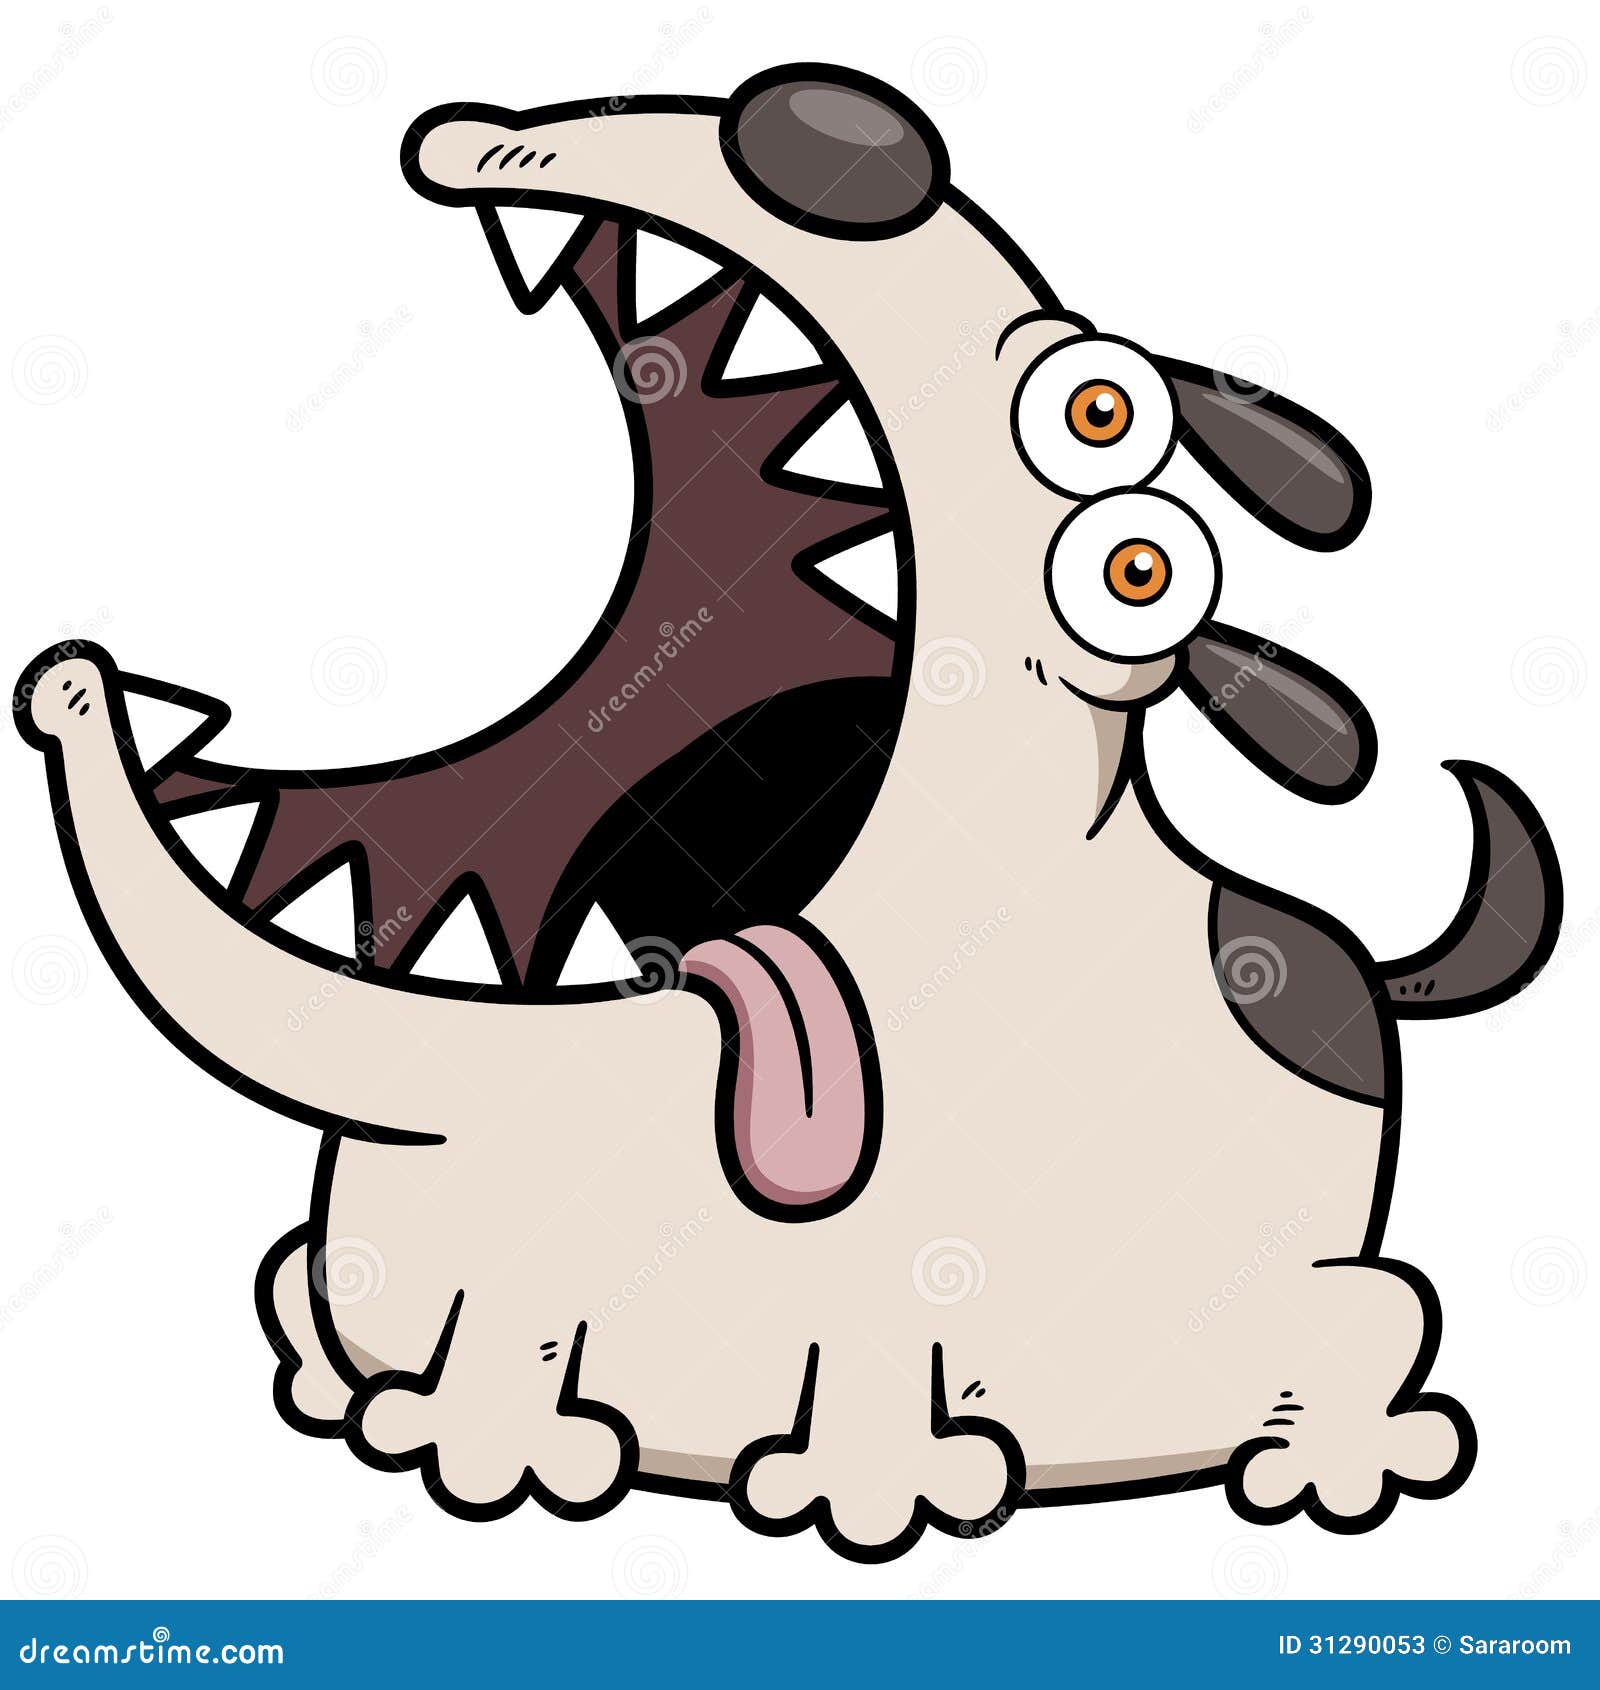 clipart angry dog - photo #31